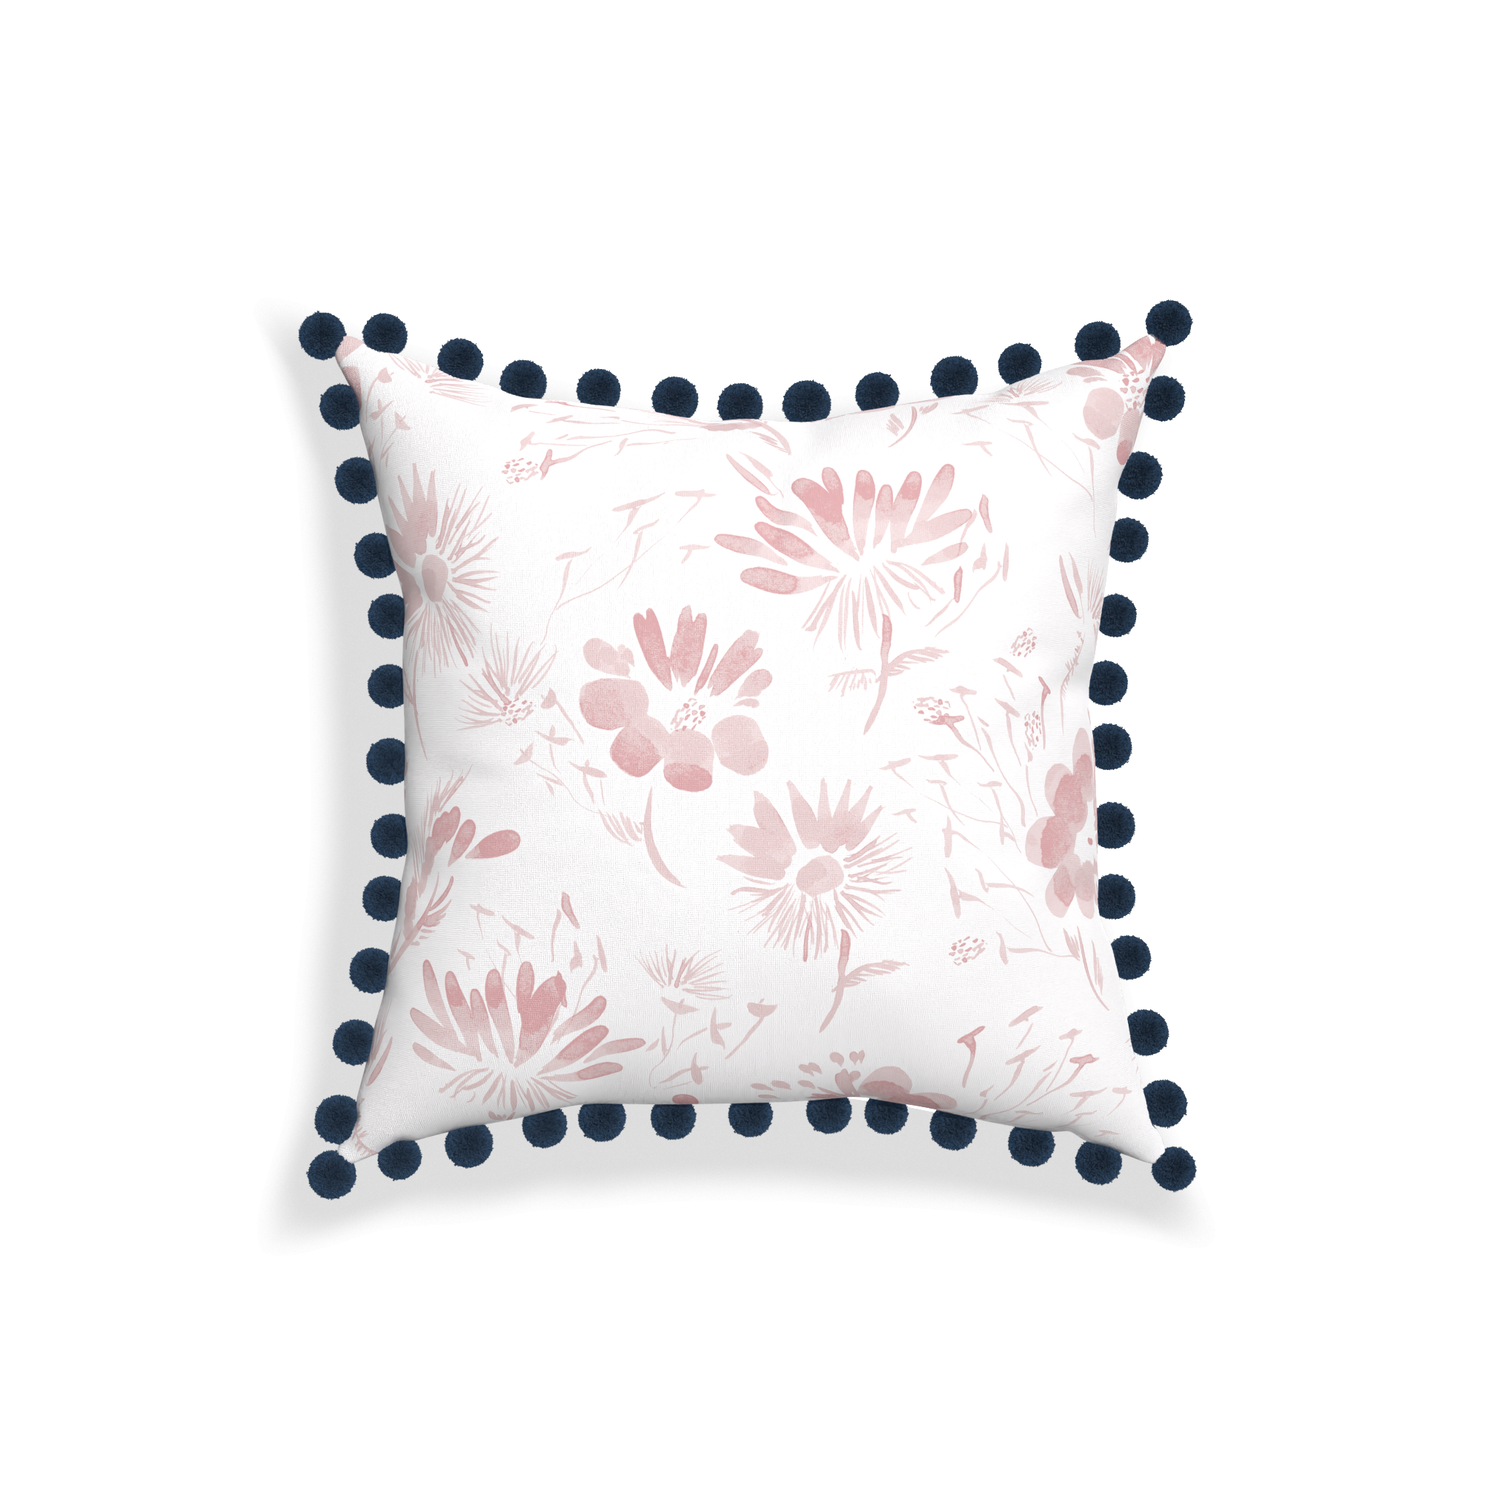 18-square blake custom pink floralpillow with c on white background